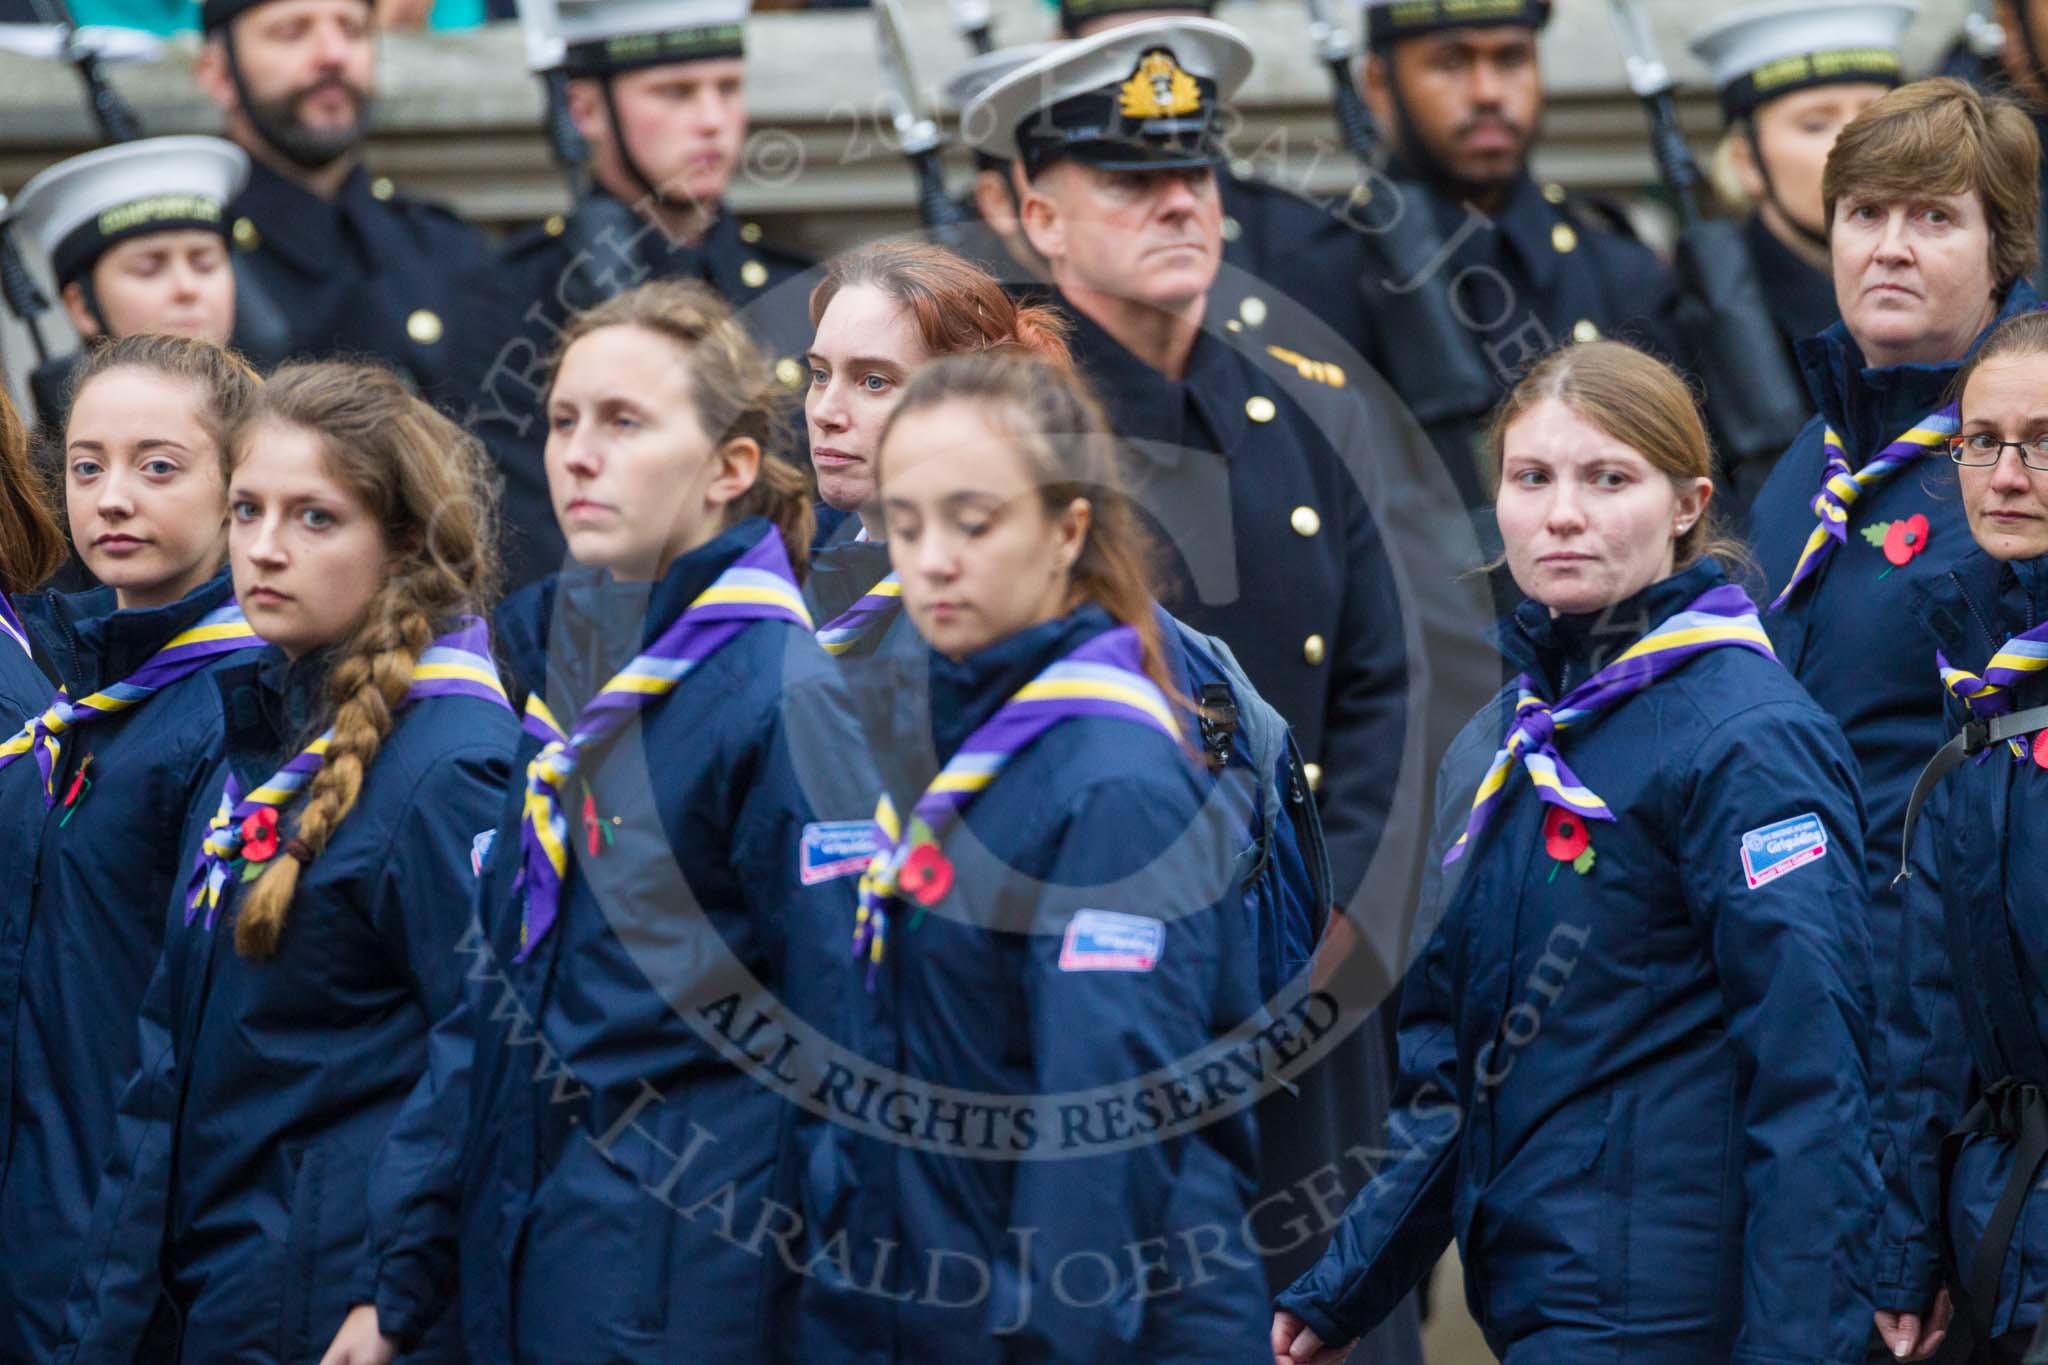 Remembrance Sunday at the Cenotaph 2015: Group M51, Girlguiding London & South East England.
Cenotaph, Whitehall, London SW1,
London,
Greater London,
United Kingdom,
on 08 November 2015 at 12:21, image #1733